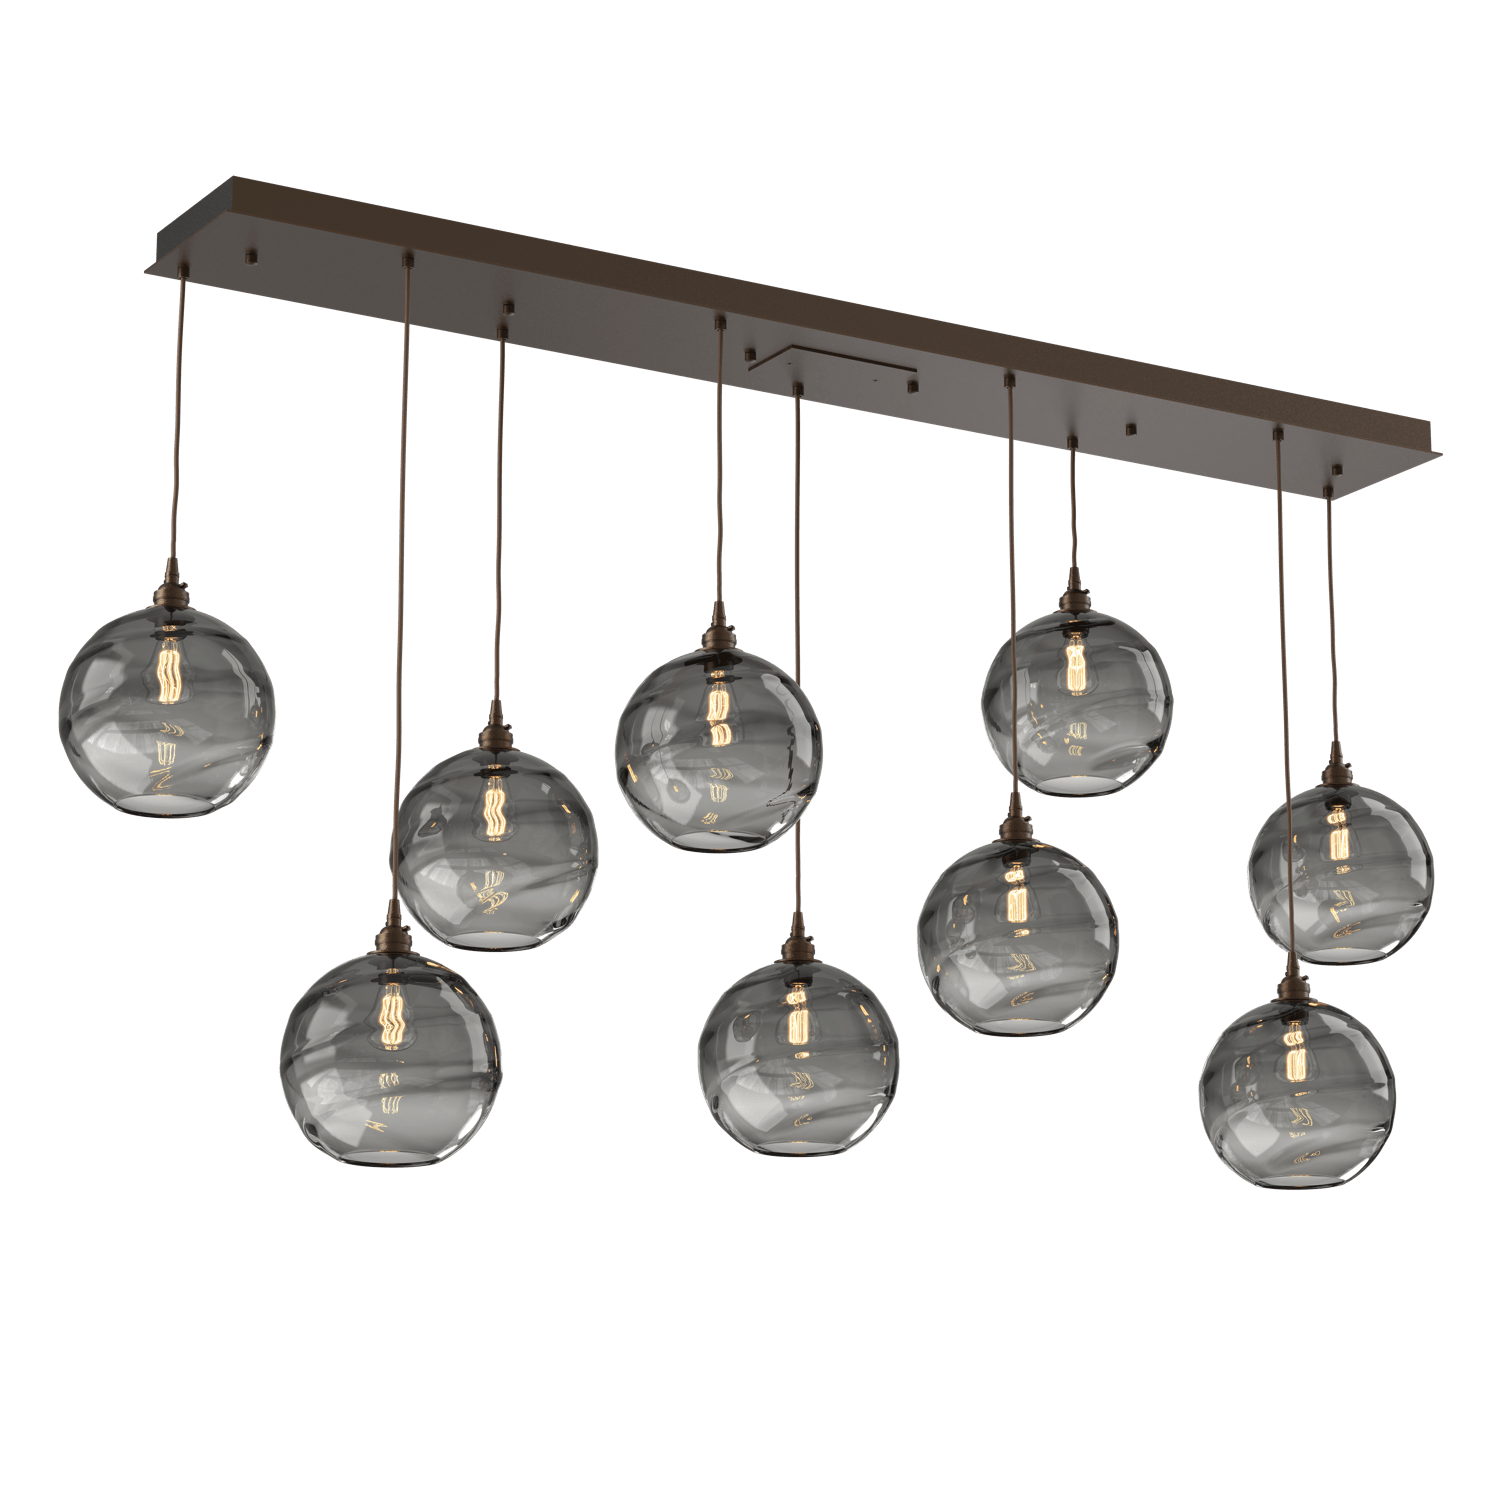 PLB0047-09-FB-OS-Hammerton-Studio-Optic-Blown-Glass-Terra-9-light-linear-pendant-chandelier-with-flat-bronze-finish-and-optic-smoke-blown-glass-shades-and-incandescent-lamping